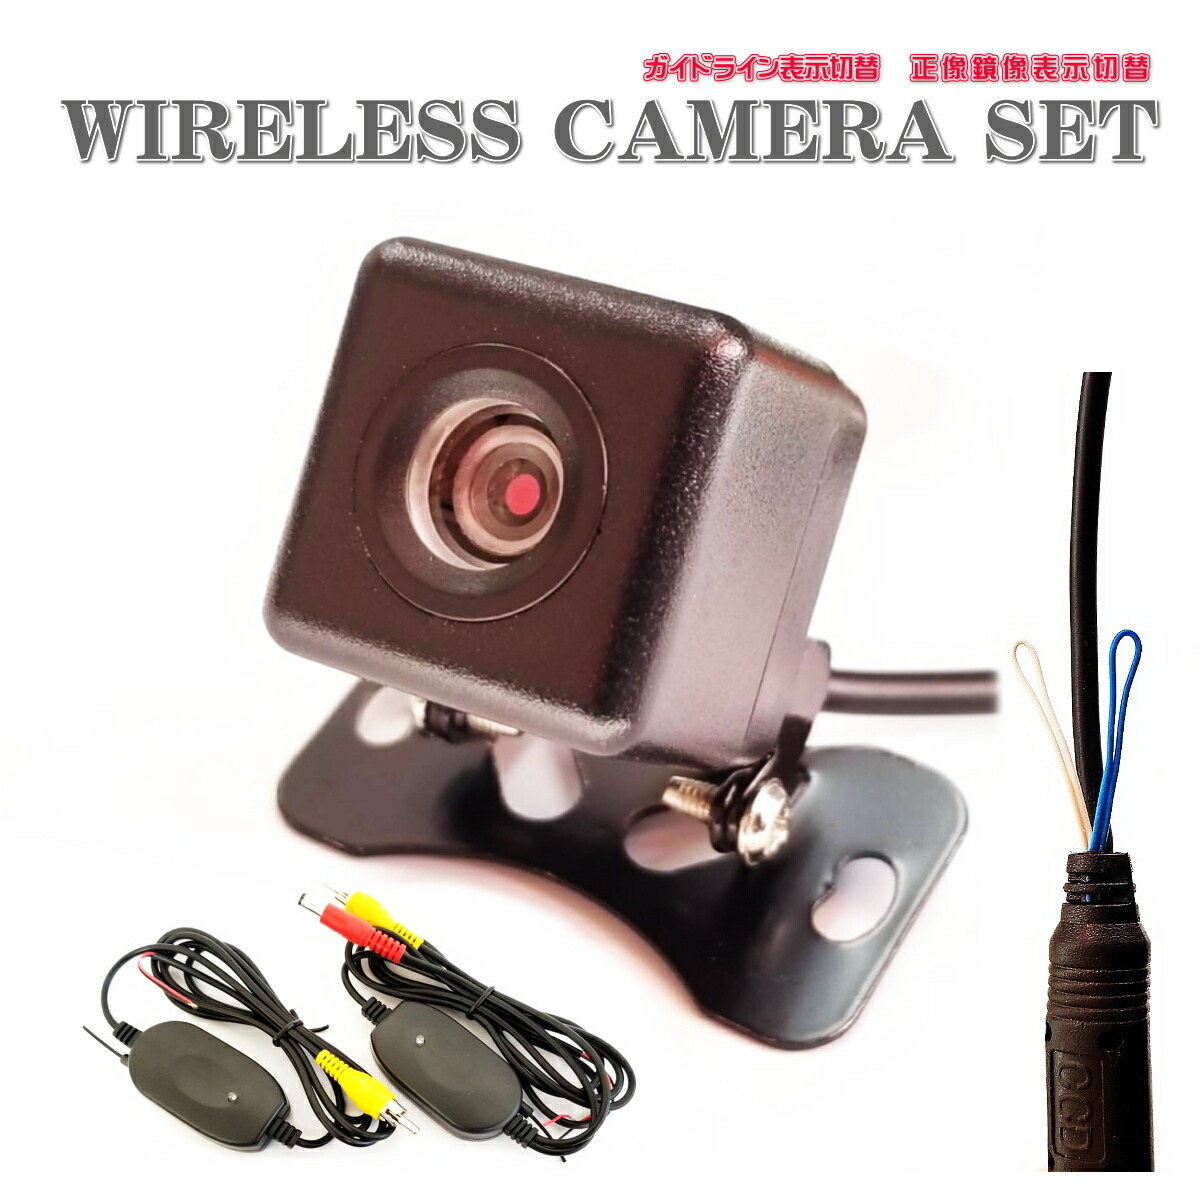  all-purpose back camera wireless set guideline have front camera rectangle wide-angle waterproof small size wireless immediate payment 